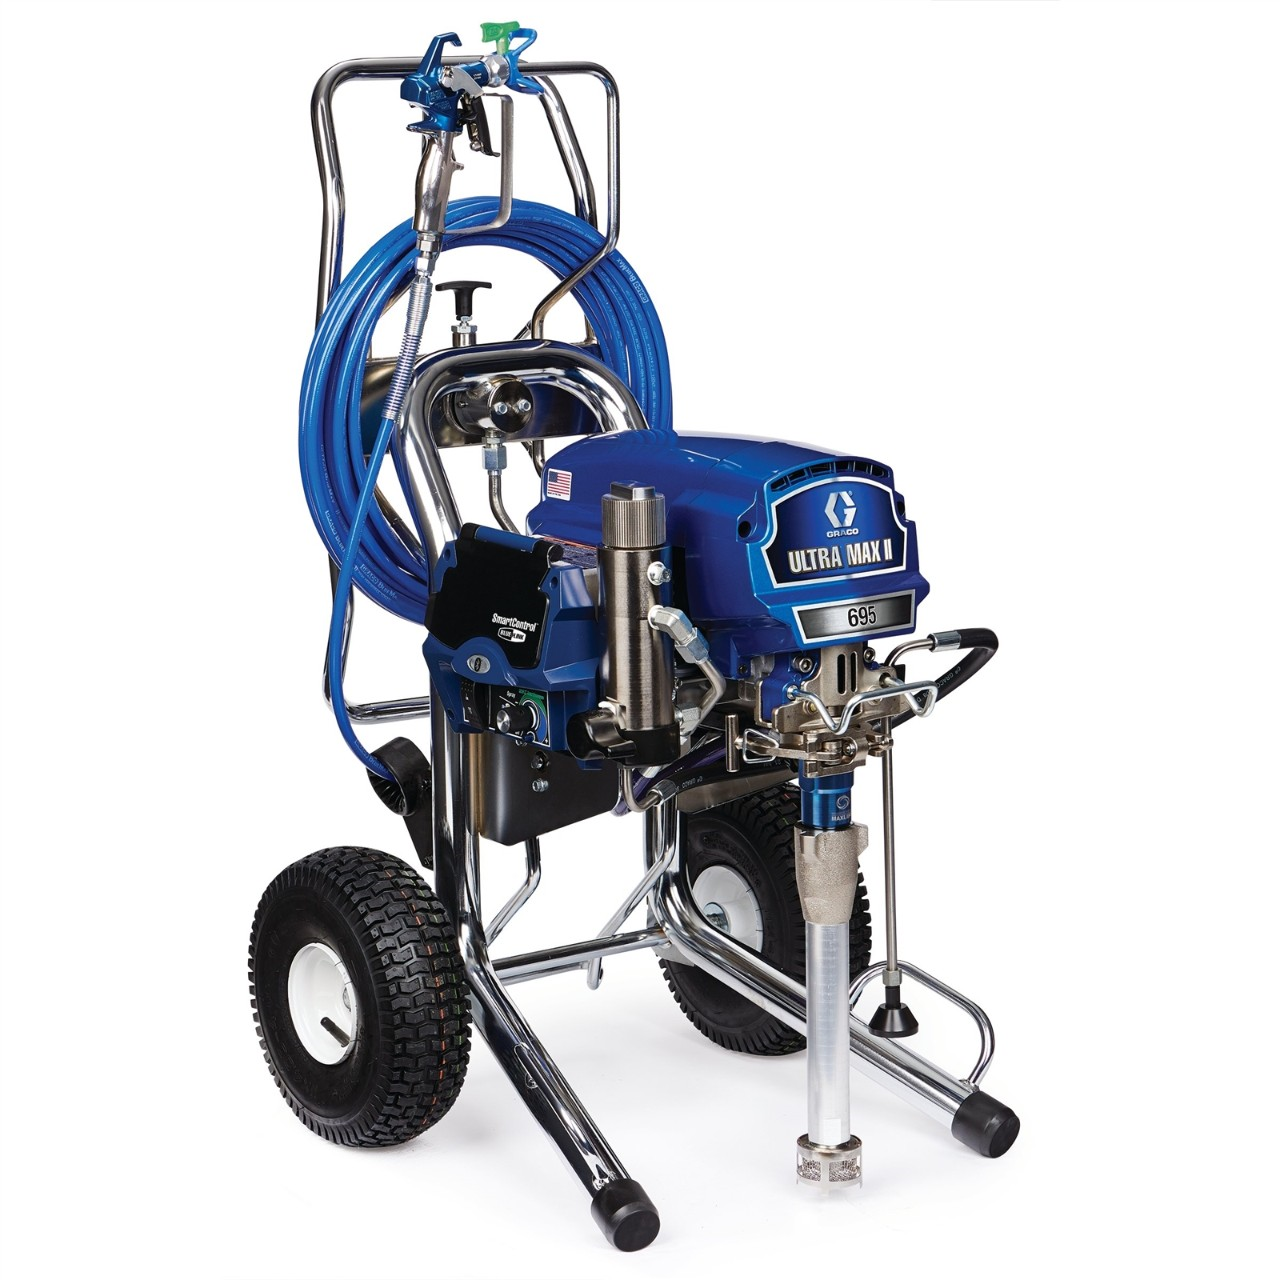 Graco Ultra Max II 695 Series Electric Airless Sprayer Parts